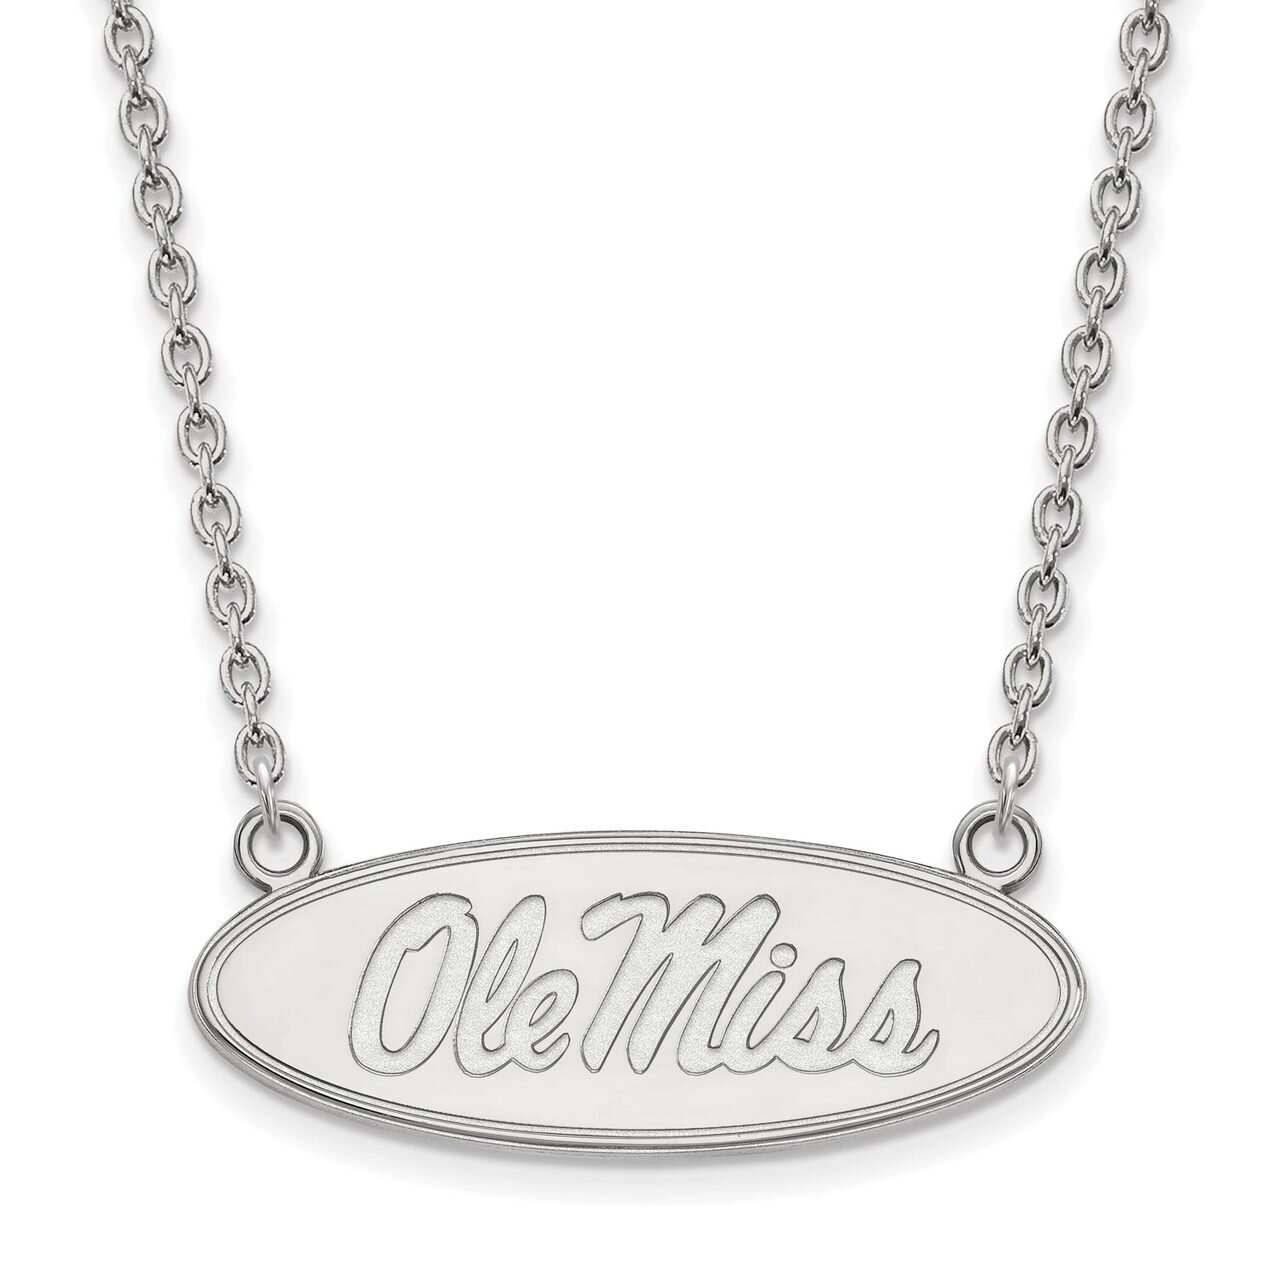 University of Mississippi Large Pendant with Chain Necklace 14k White Gold 4W016UMS-18